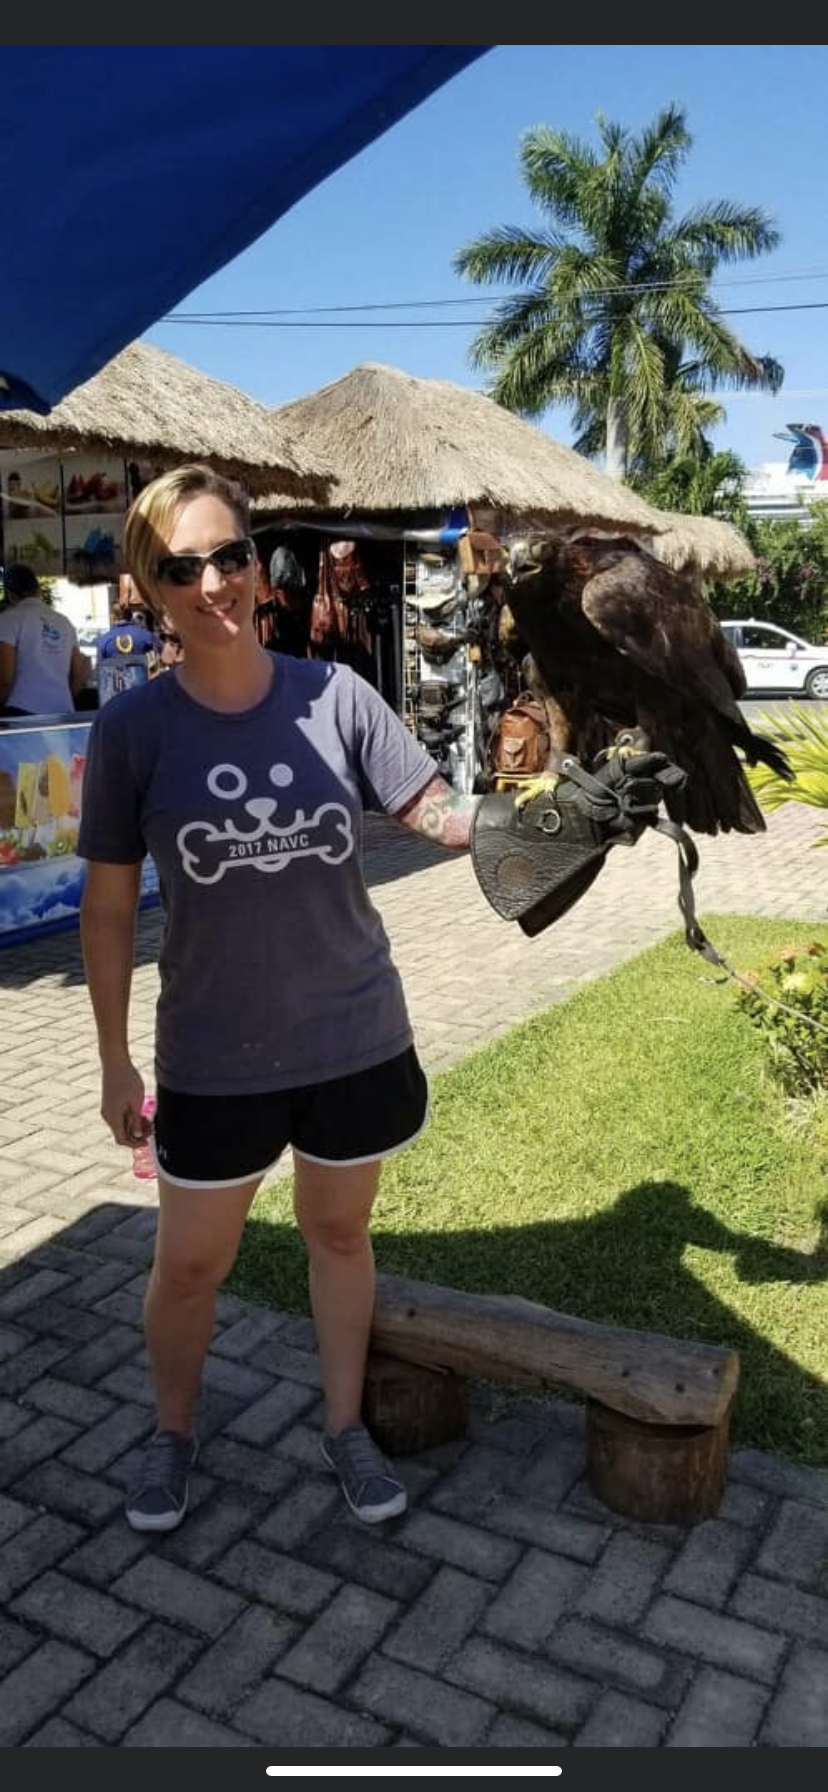 Person holding large bird outside